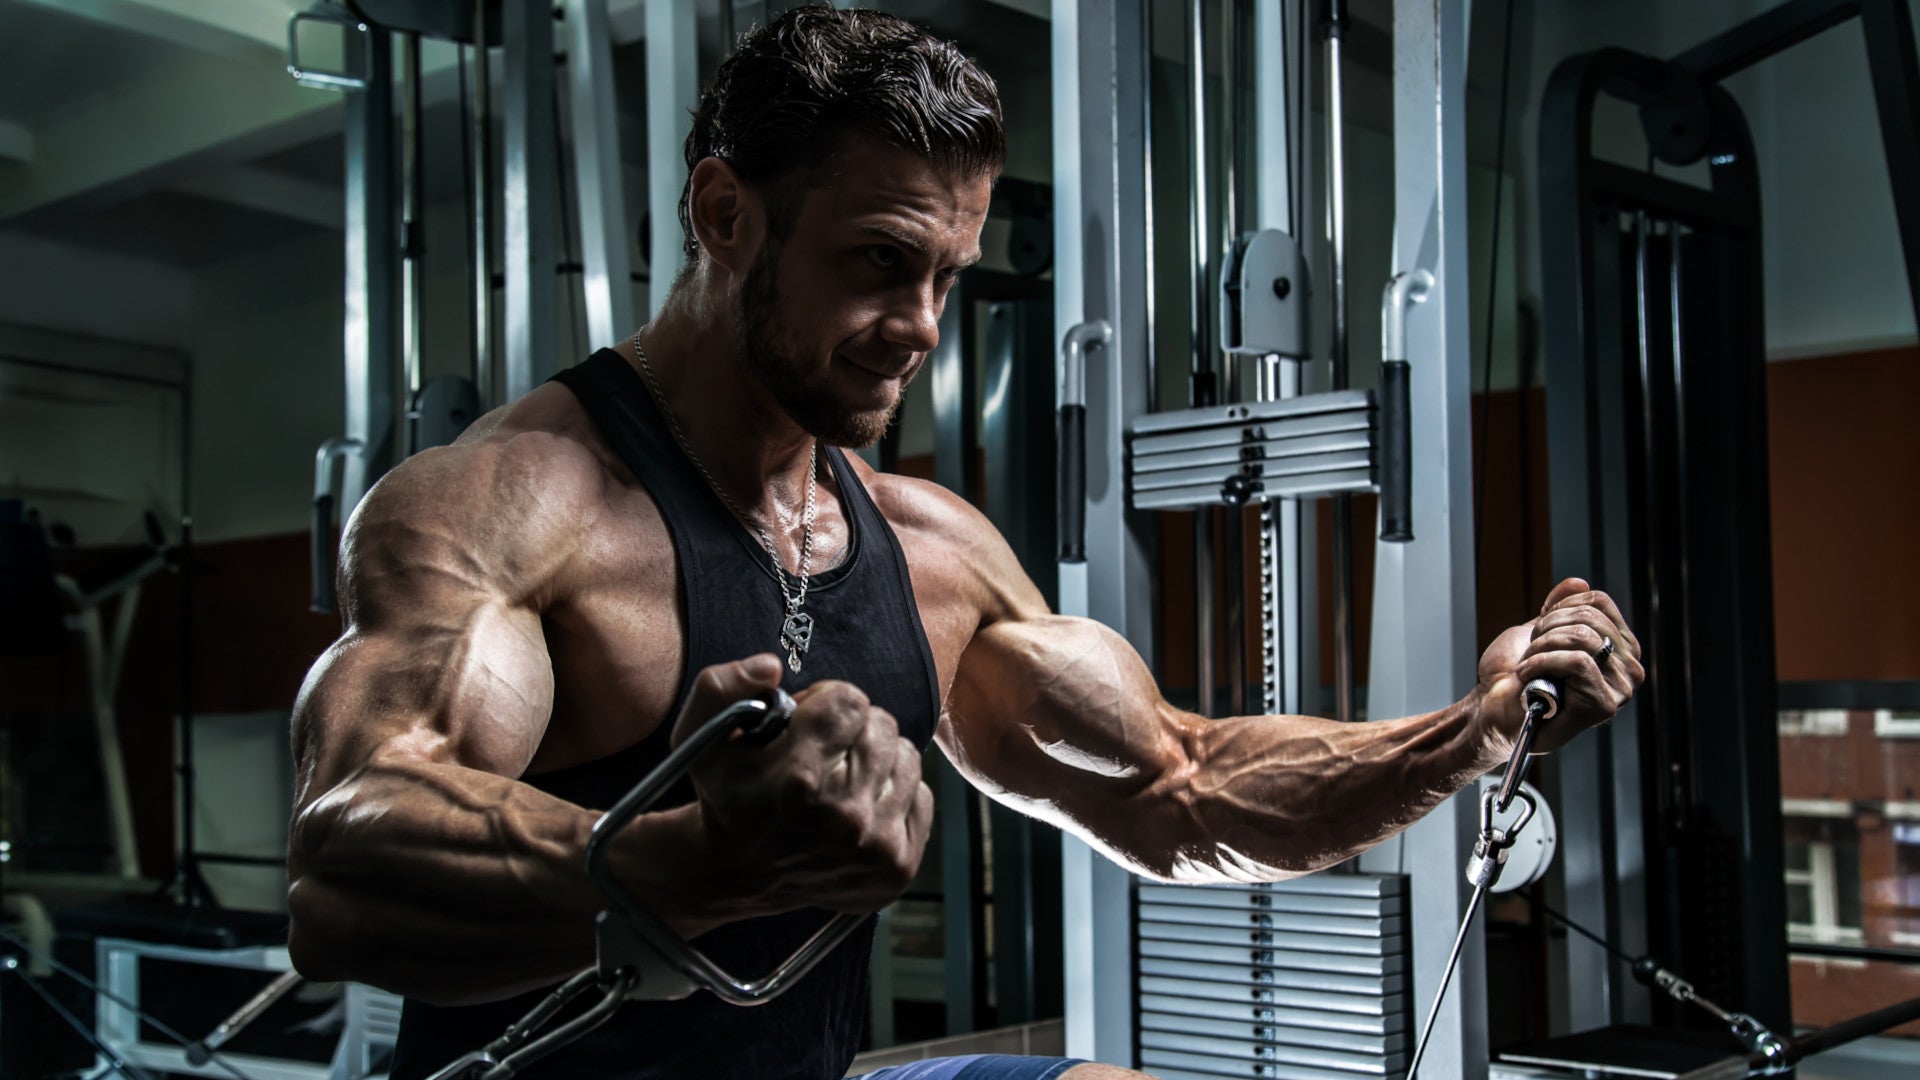 How to Speed Up Muscle Growth